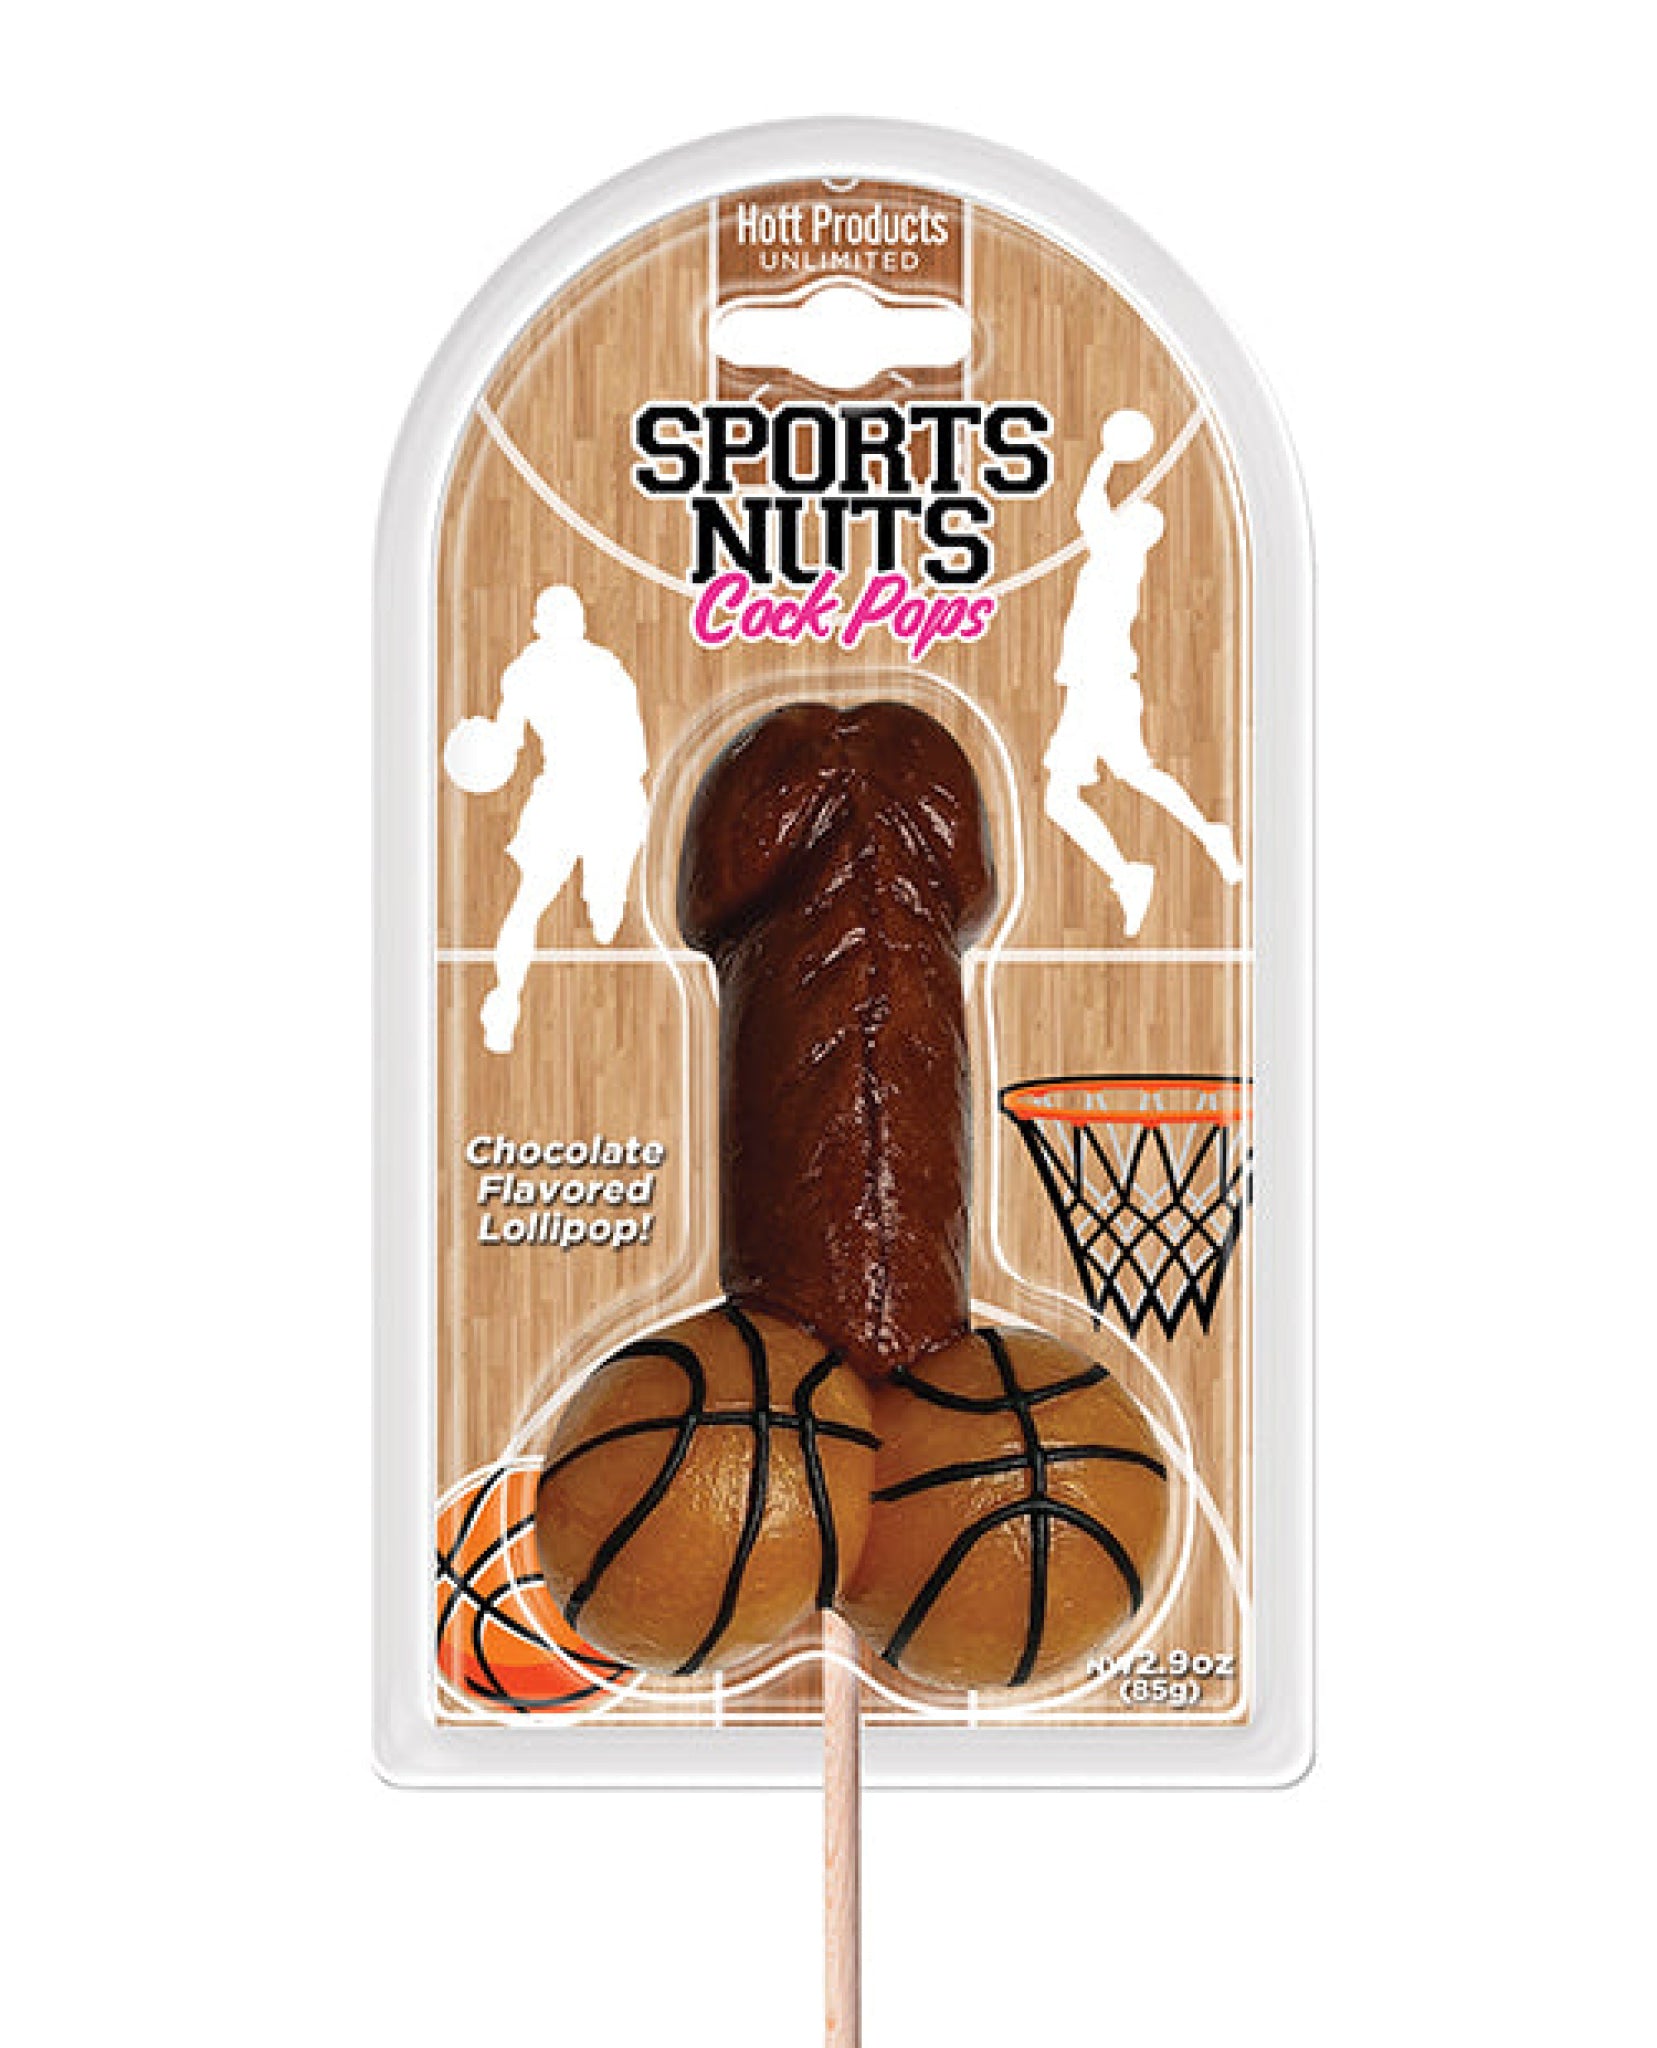 Sports Nuts Cock Pop Basketballs - Chocolate Hott Products